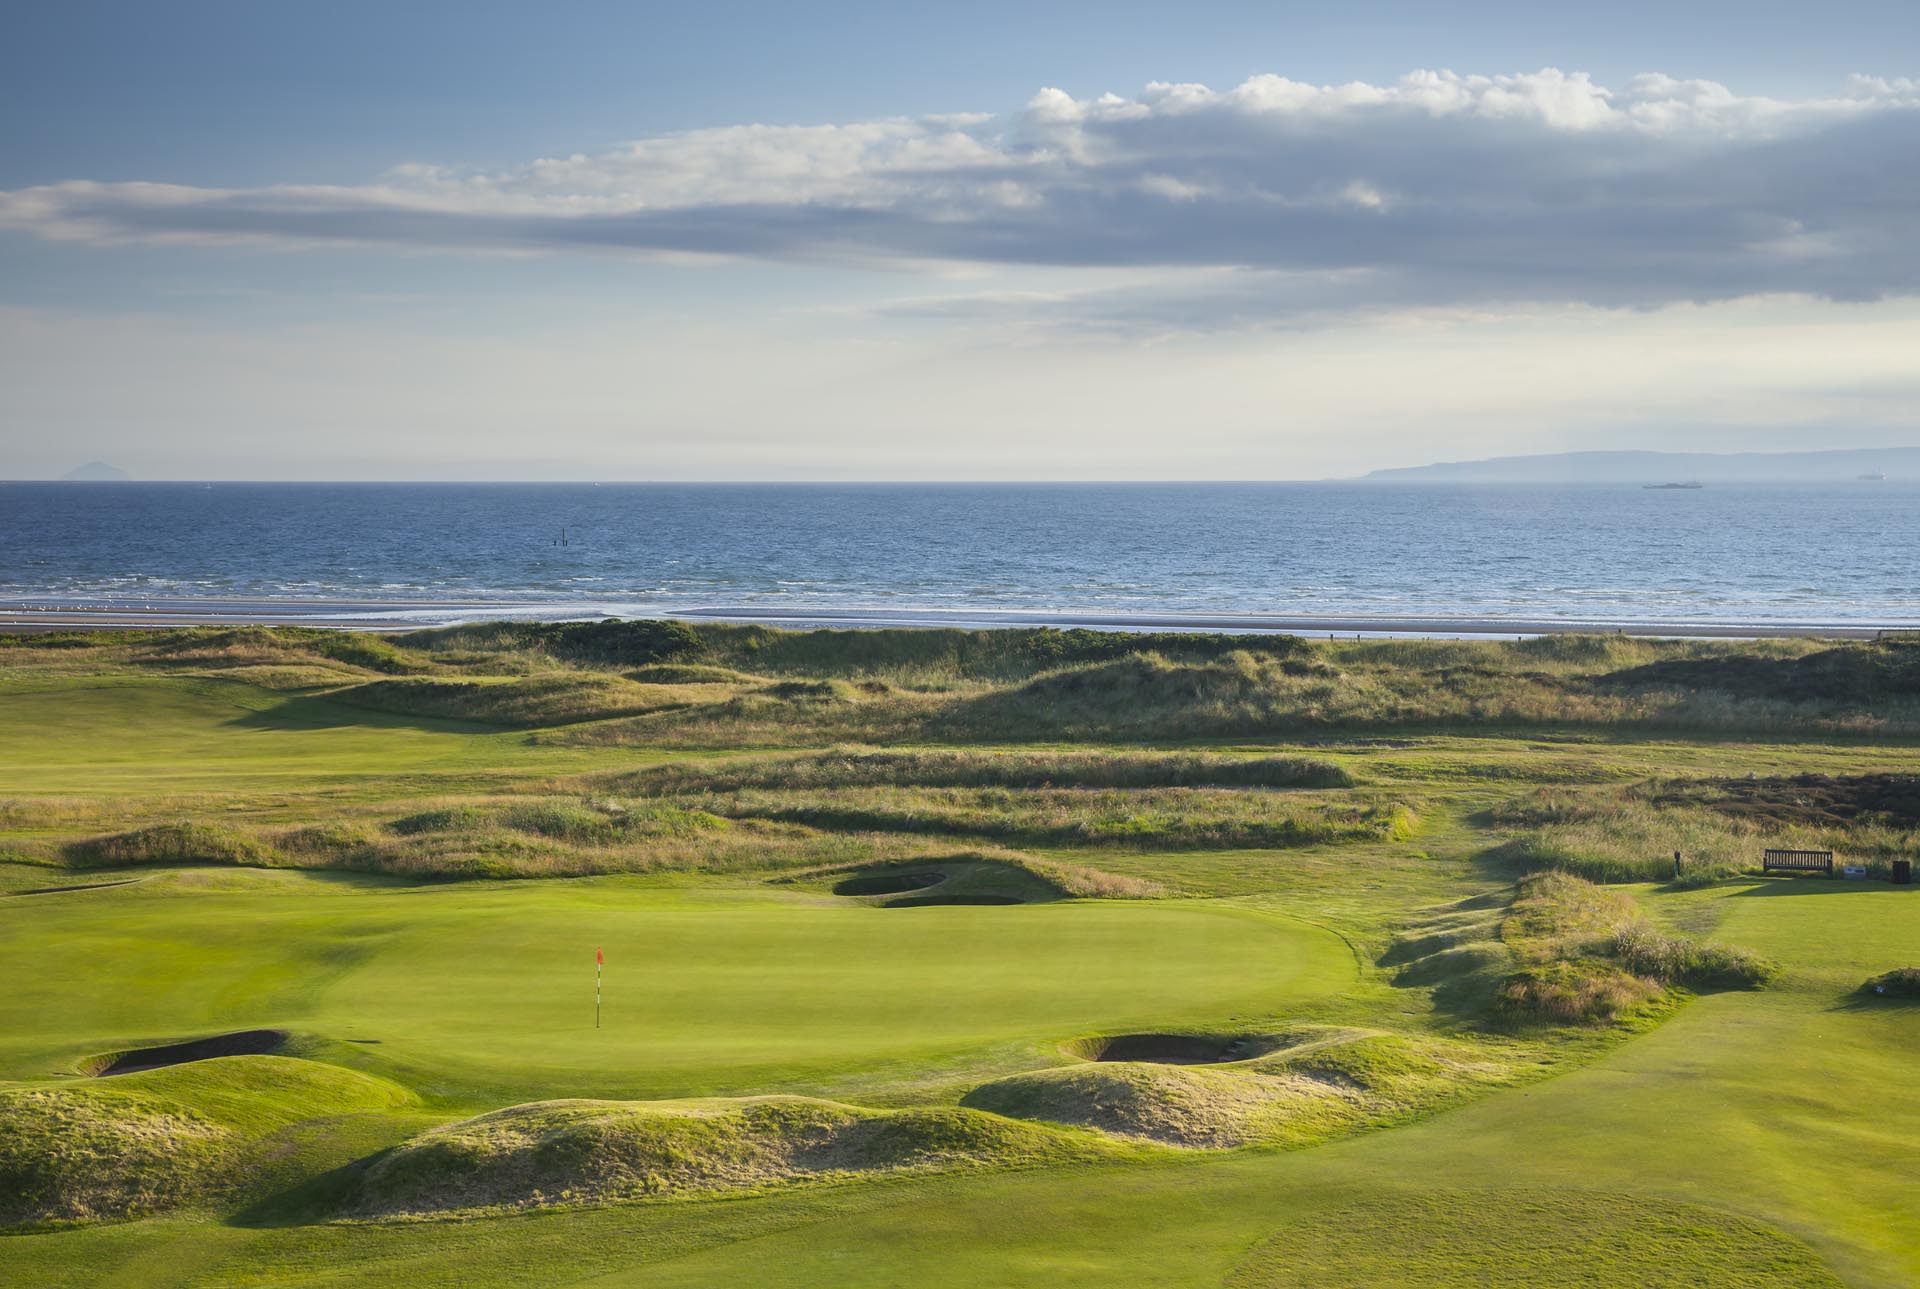 The green fairways contrast with the sea at The Western Gailes Golf Club, Ayrshire, Scotland, United Kingdom